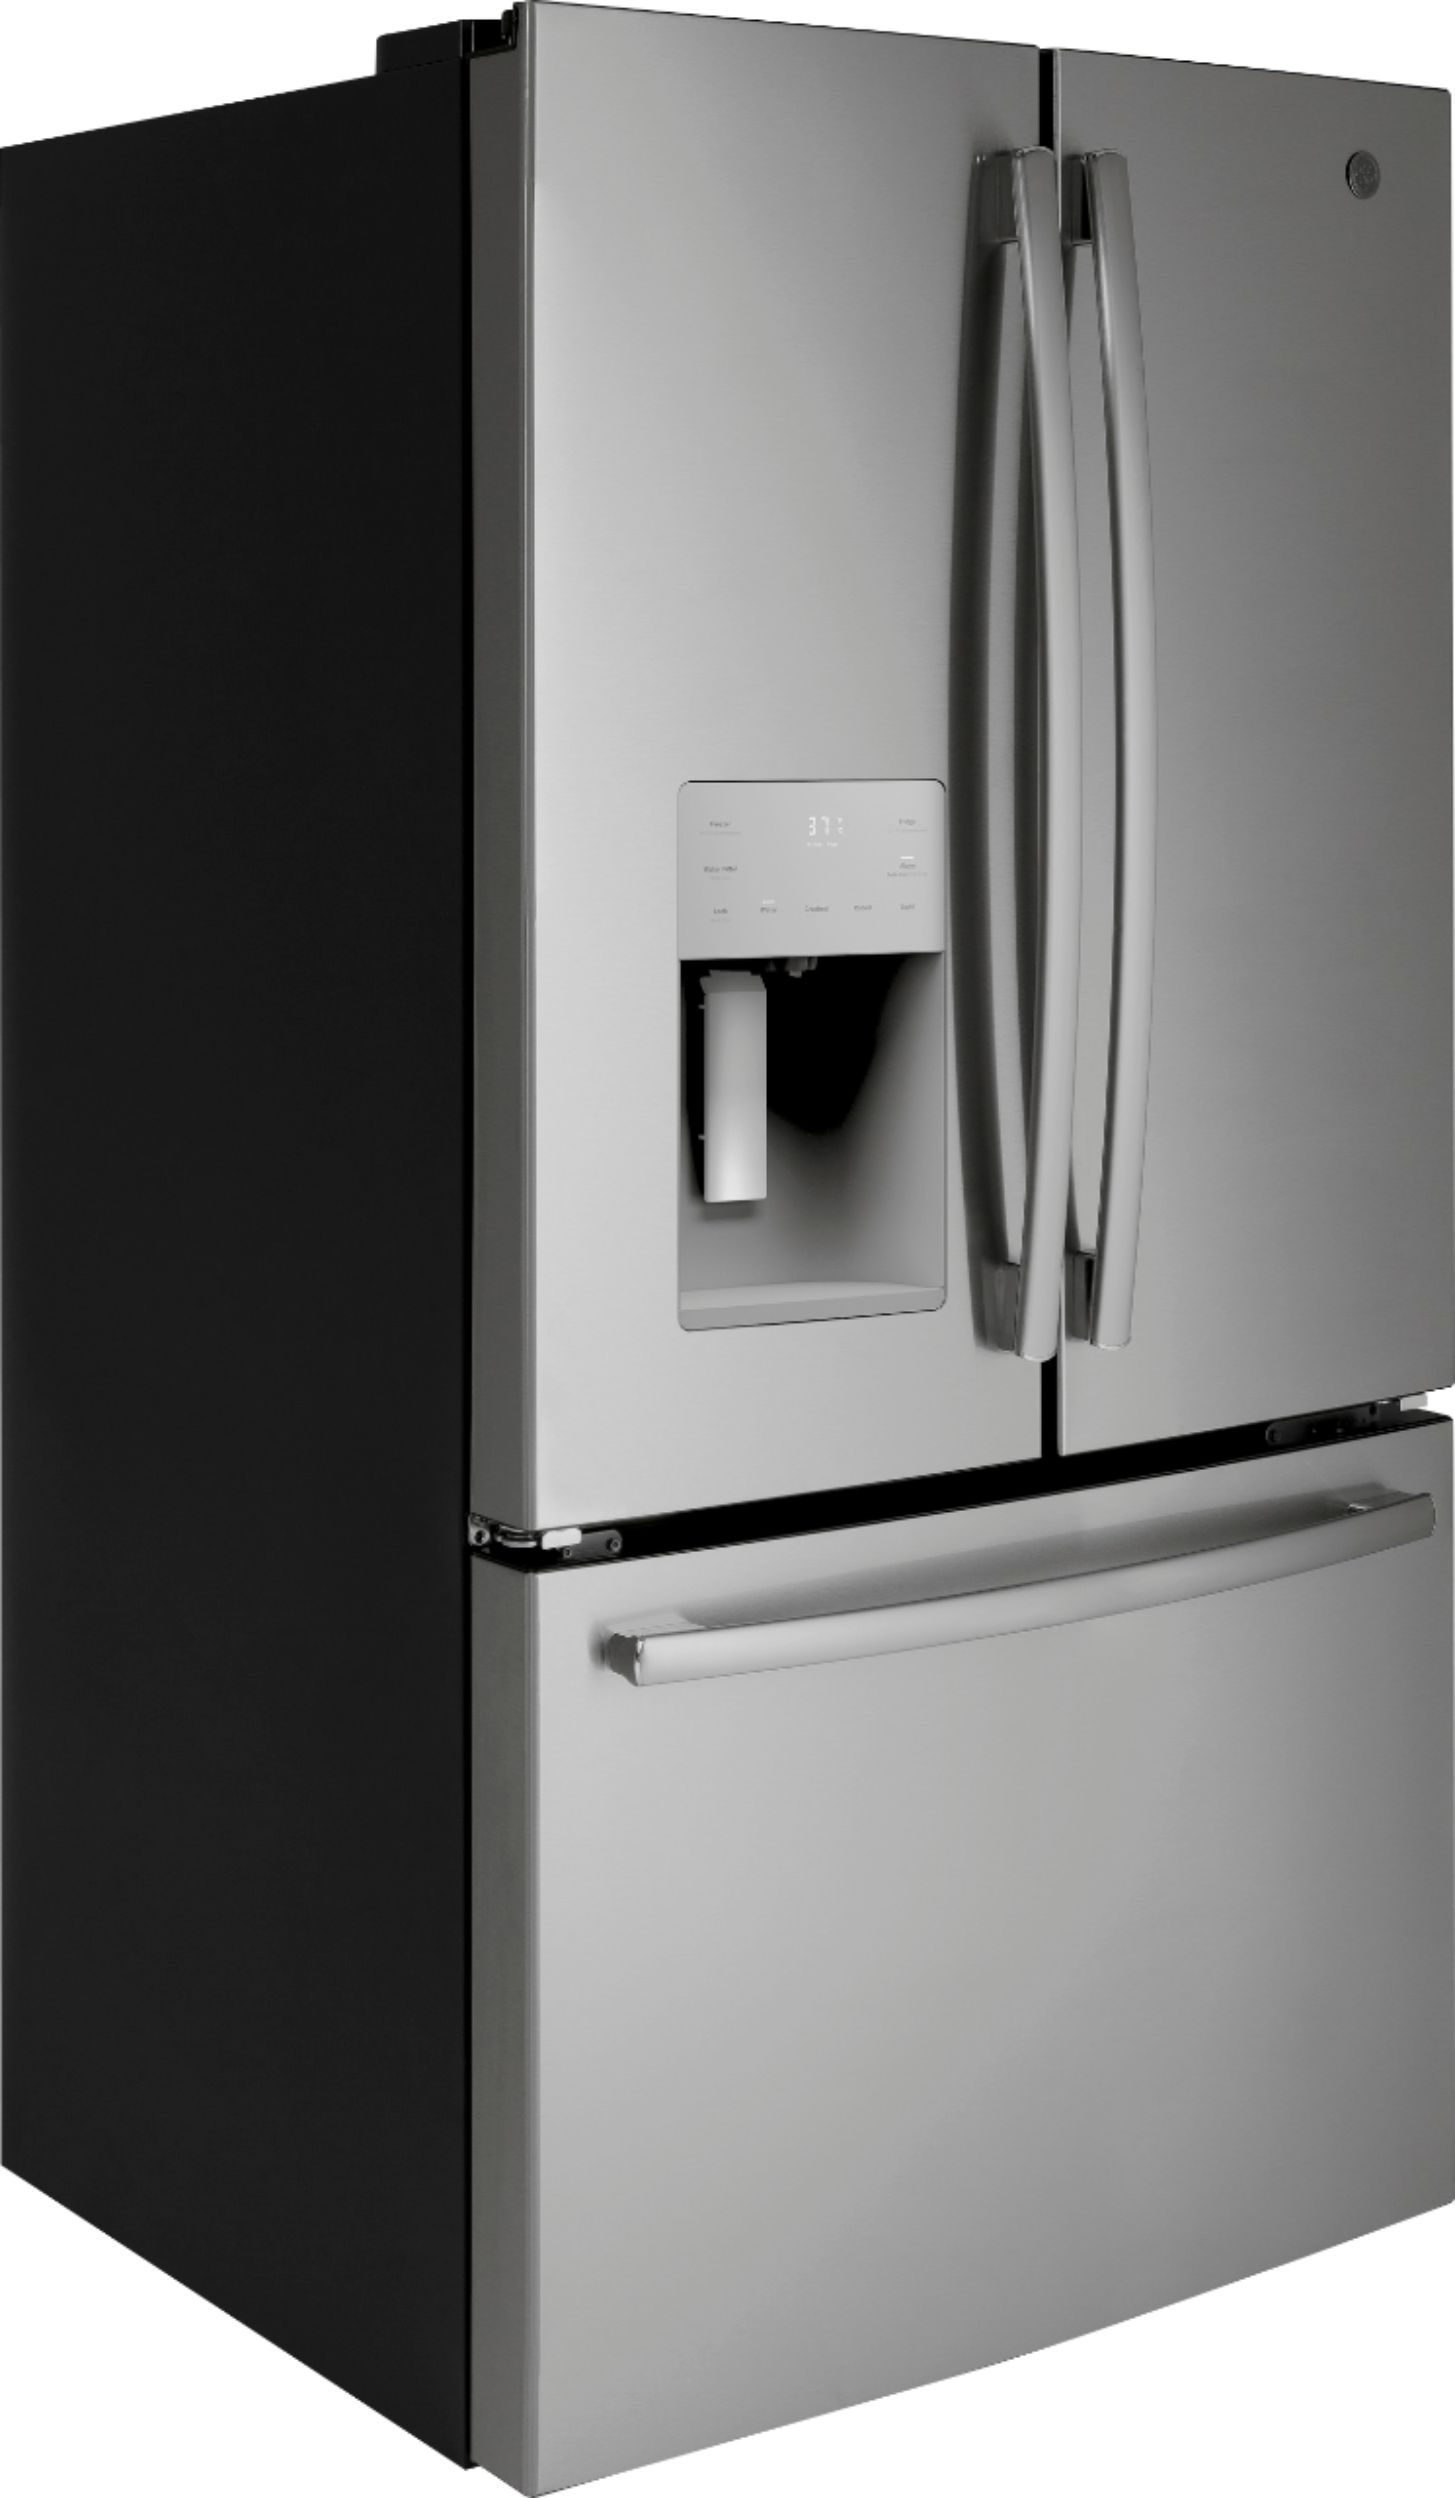 Angle View: GE - 25.6 Cu. Ft. French Door Refrigerator - Black slate